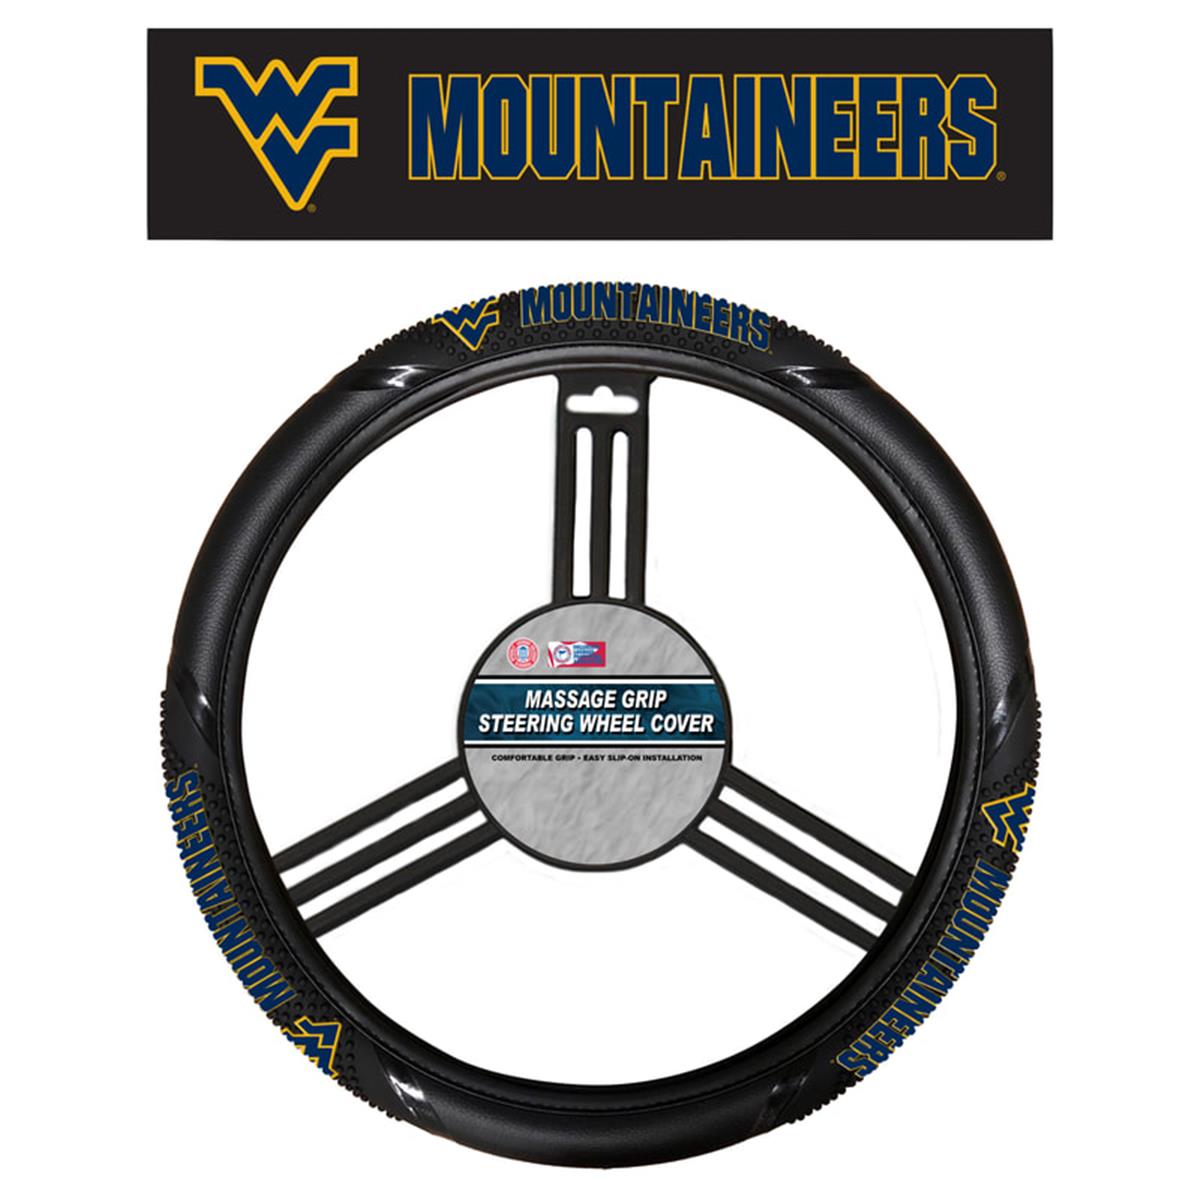 Picture of Fremont Die 2324556673 NCAA West Virginia Mountaineers Steering Wheel Cover - Massage Grip Style